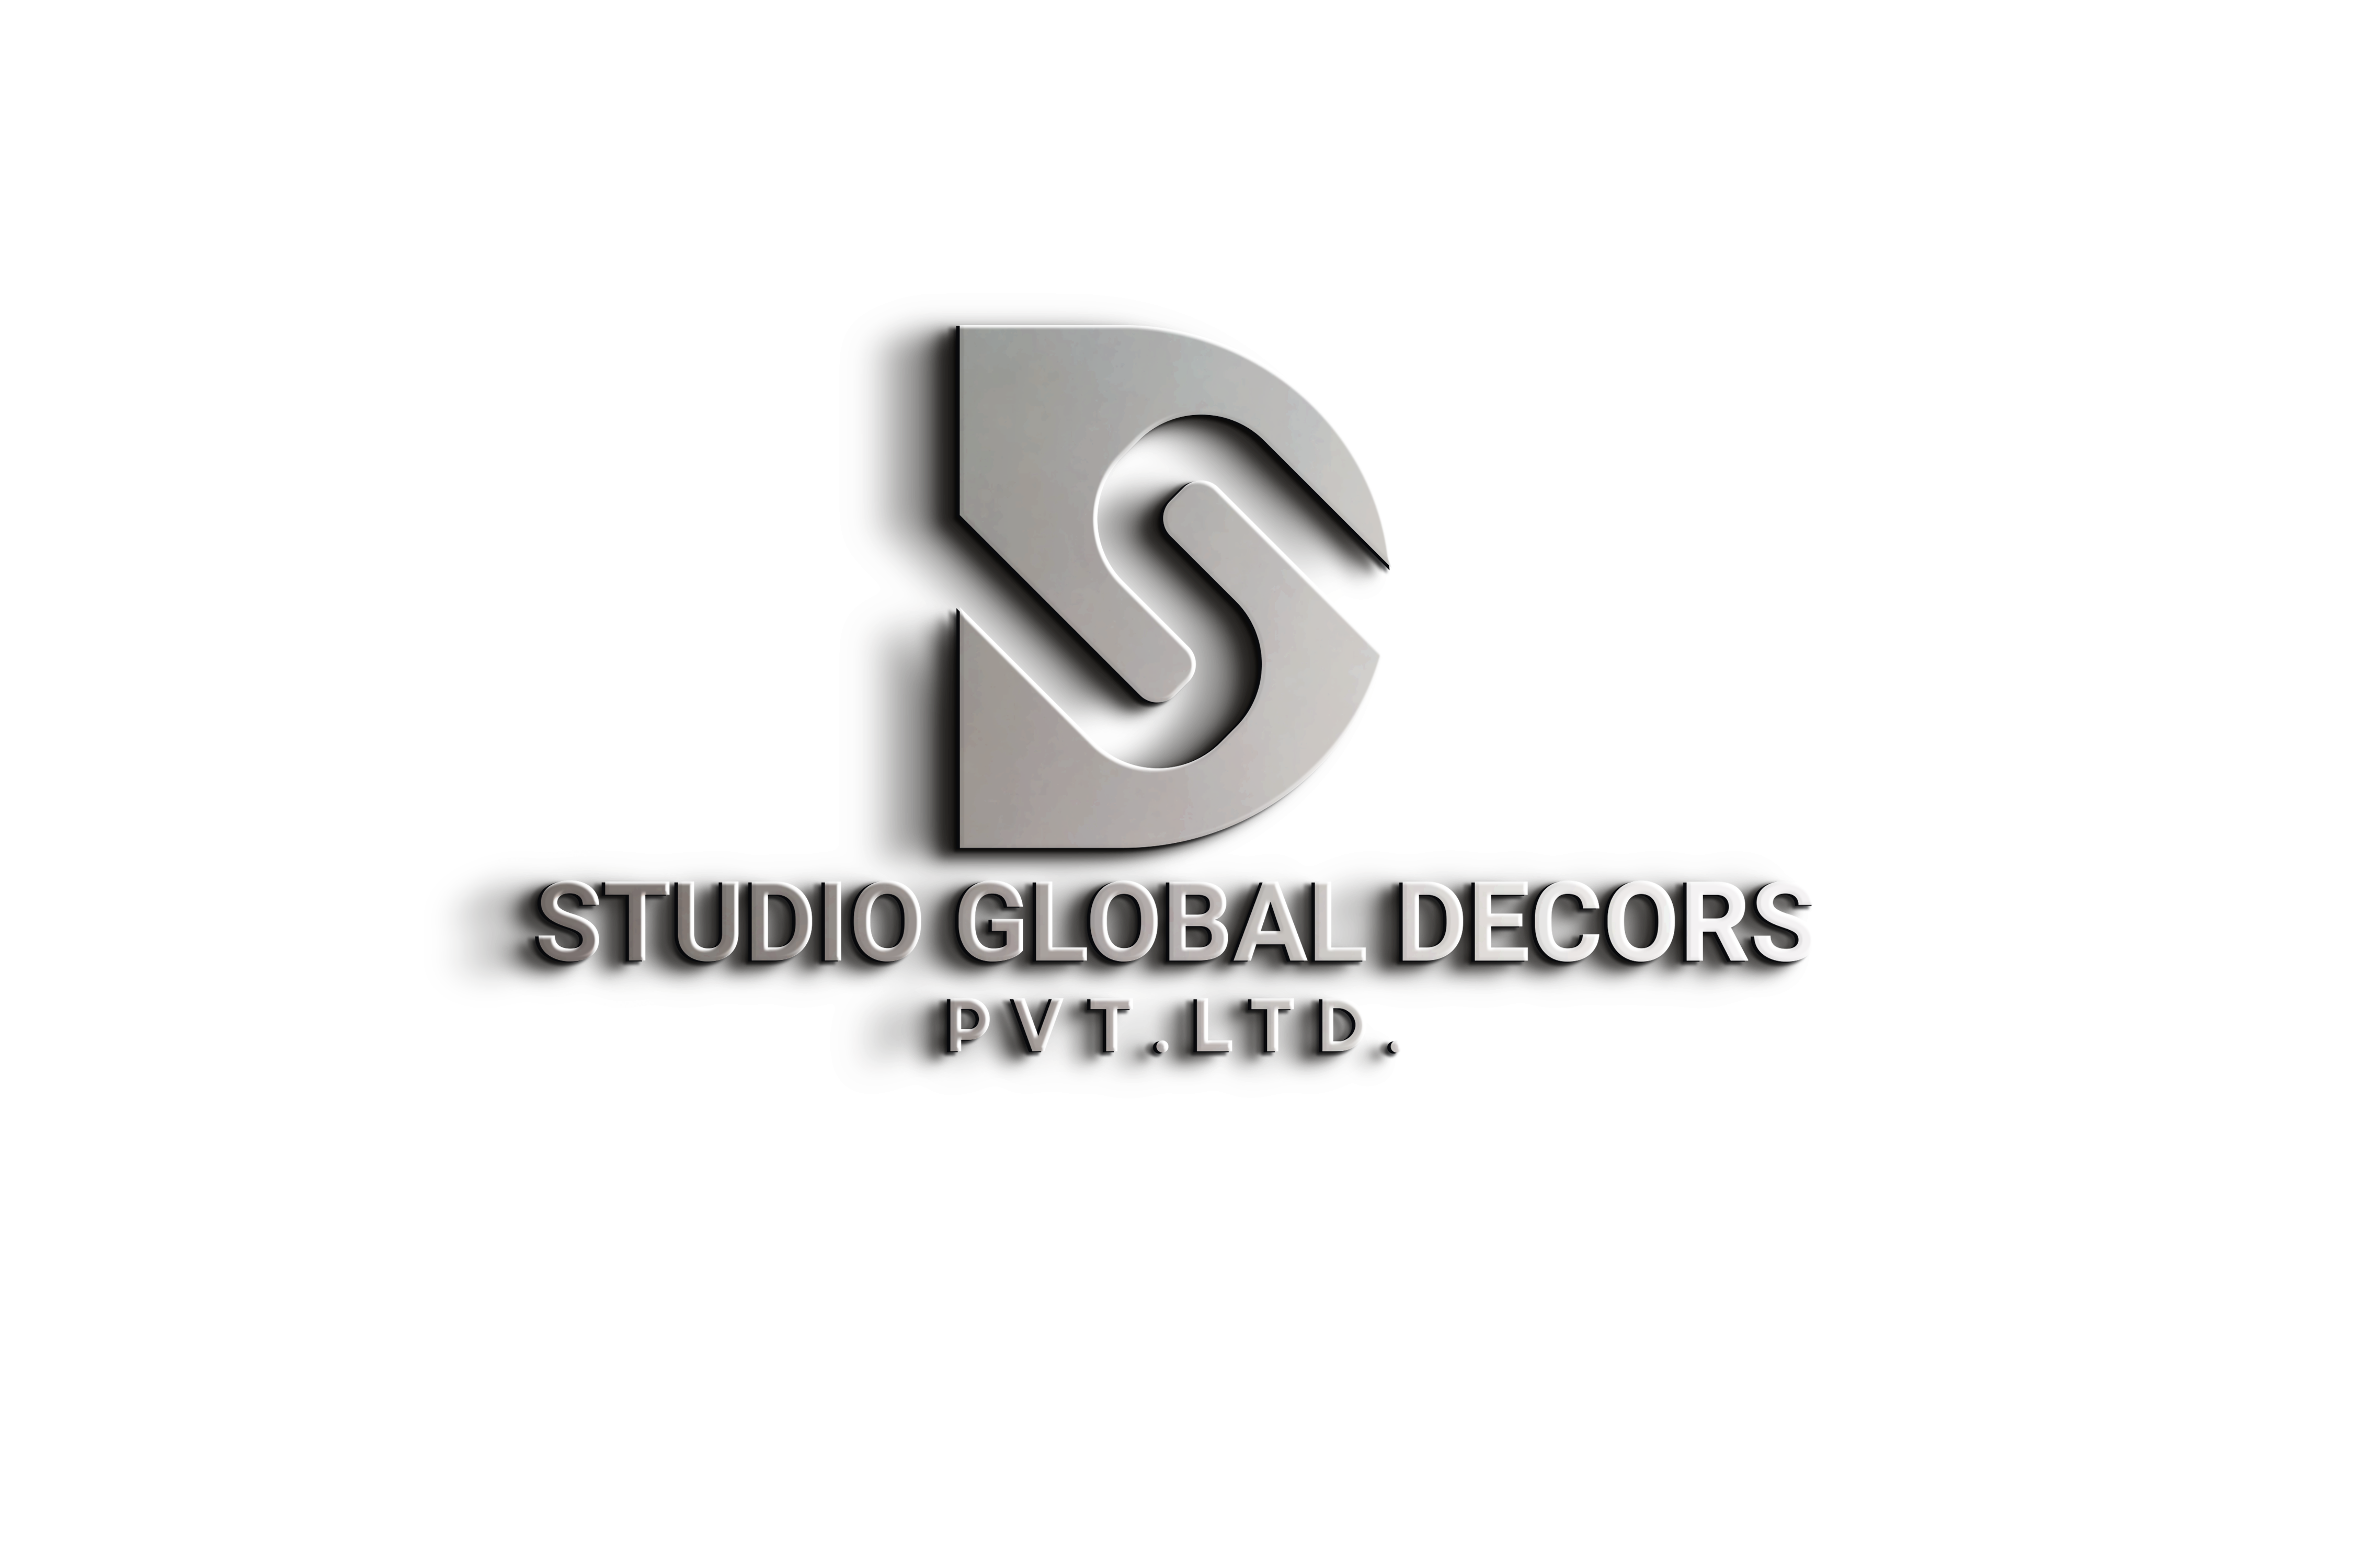 STUDIO GLOBAL DECORS PRIVATE LIMITED